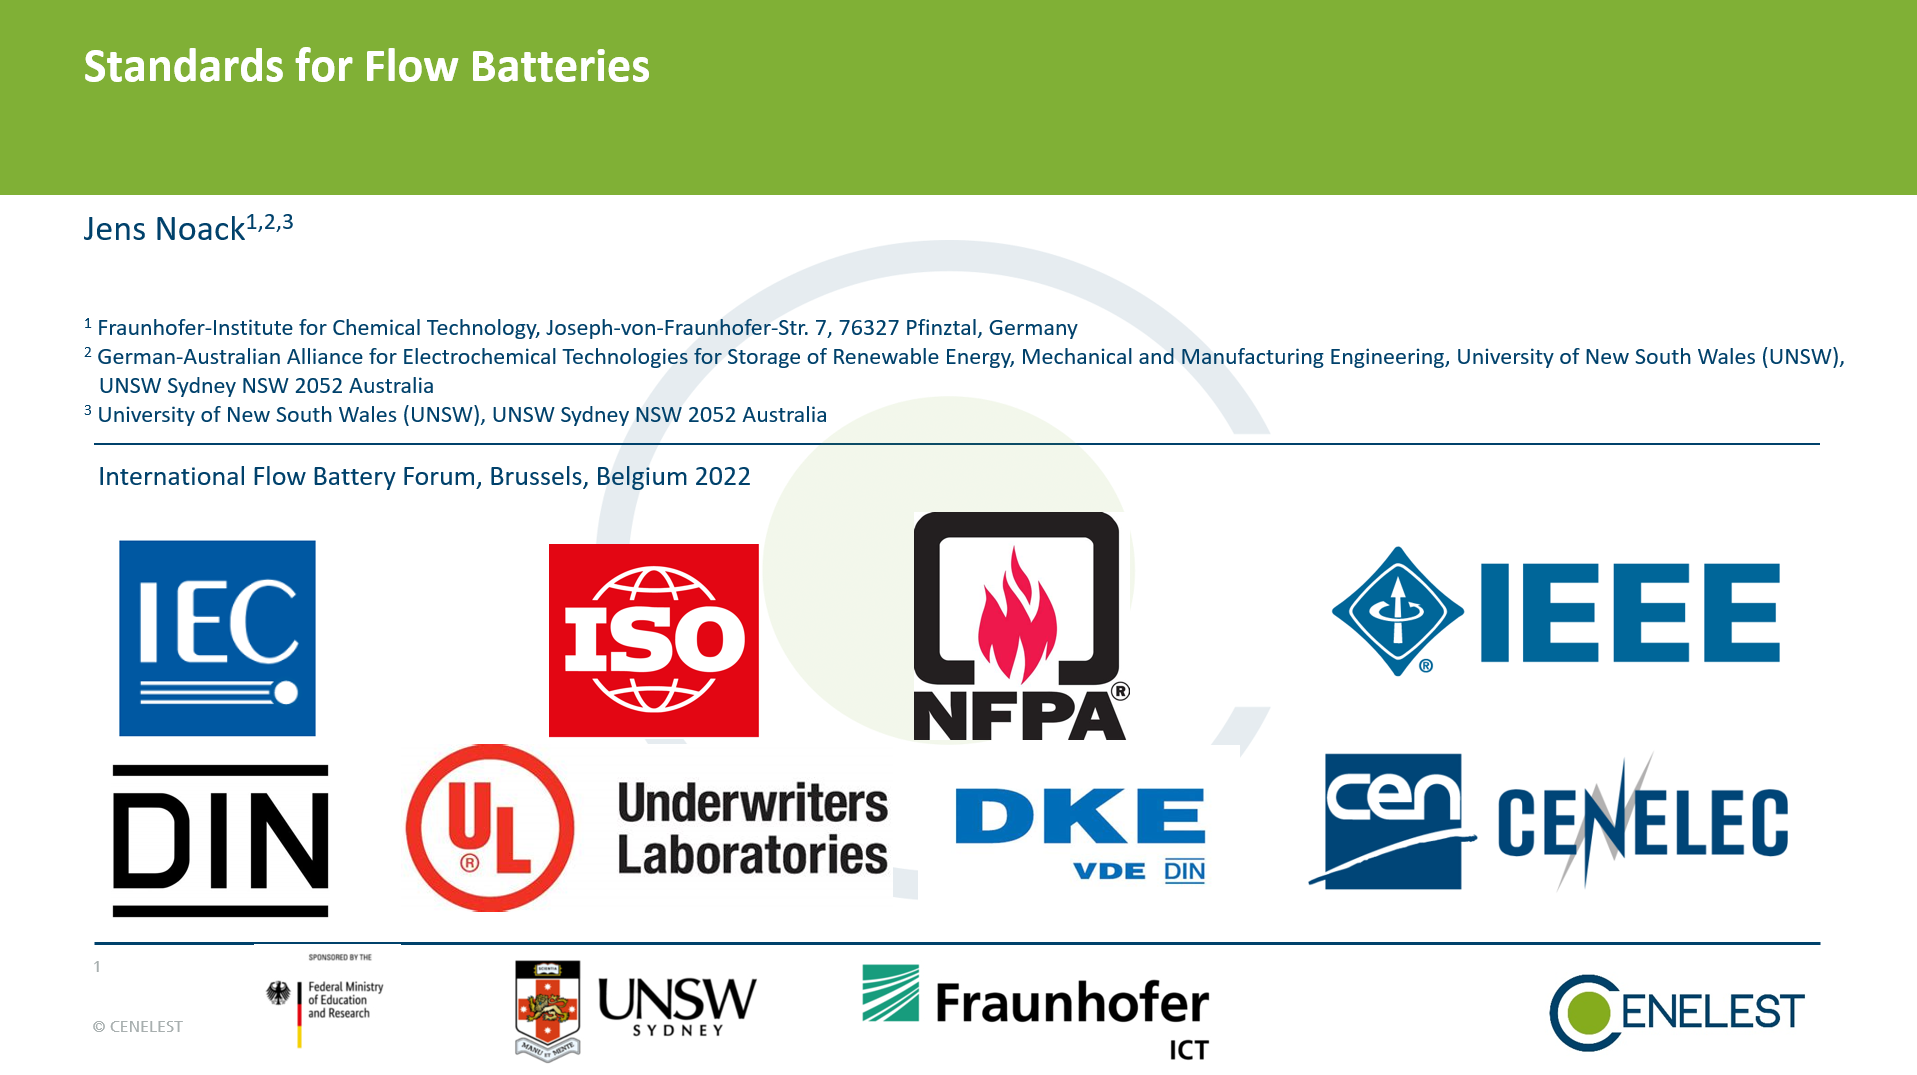 Standards for Redox Flow Batteries